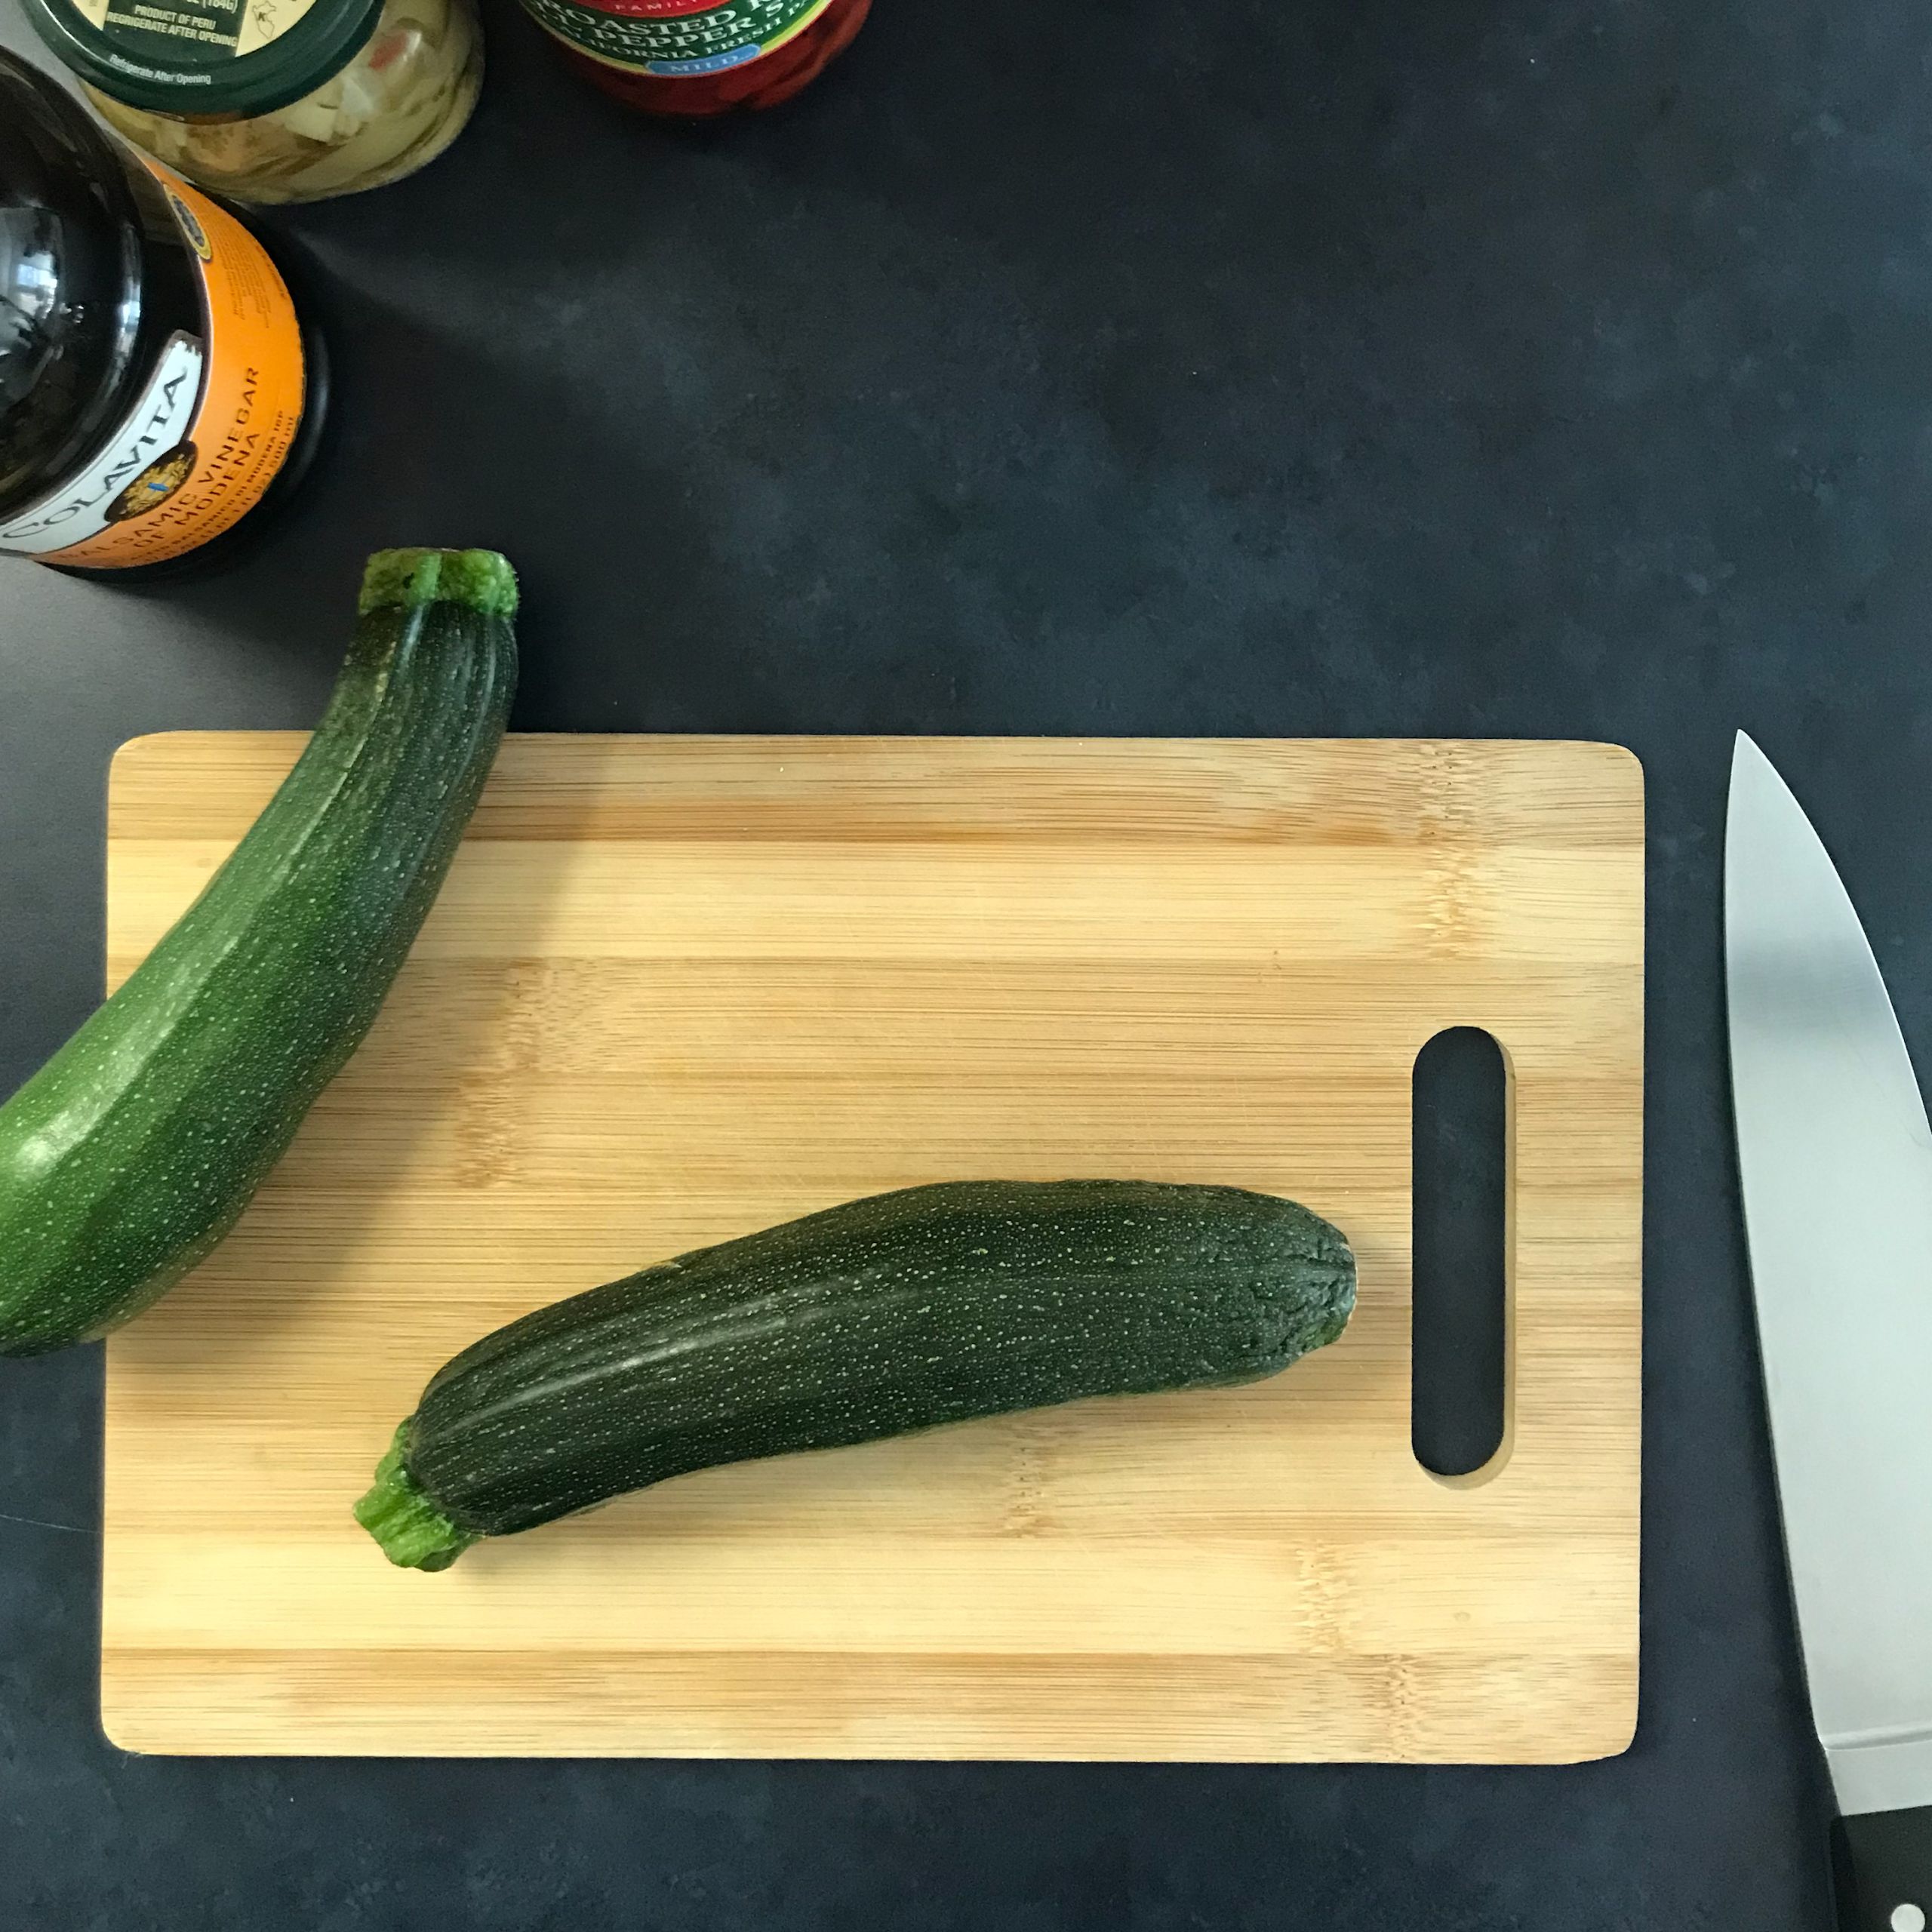 zucchini and knife on a board | my curated tastes